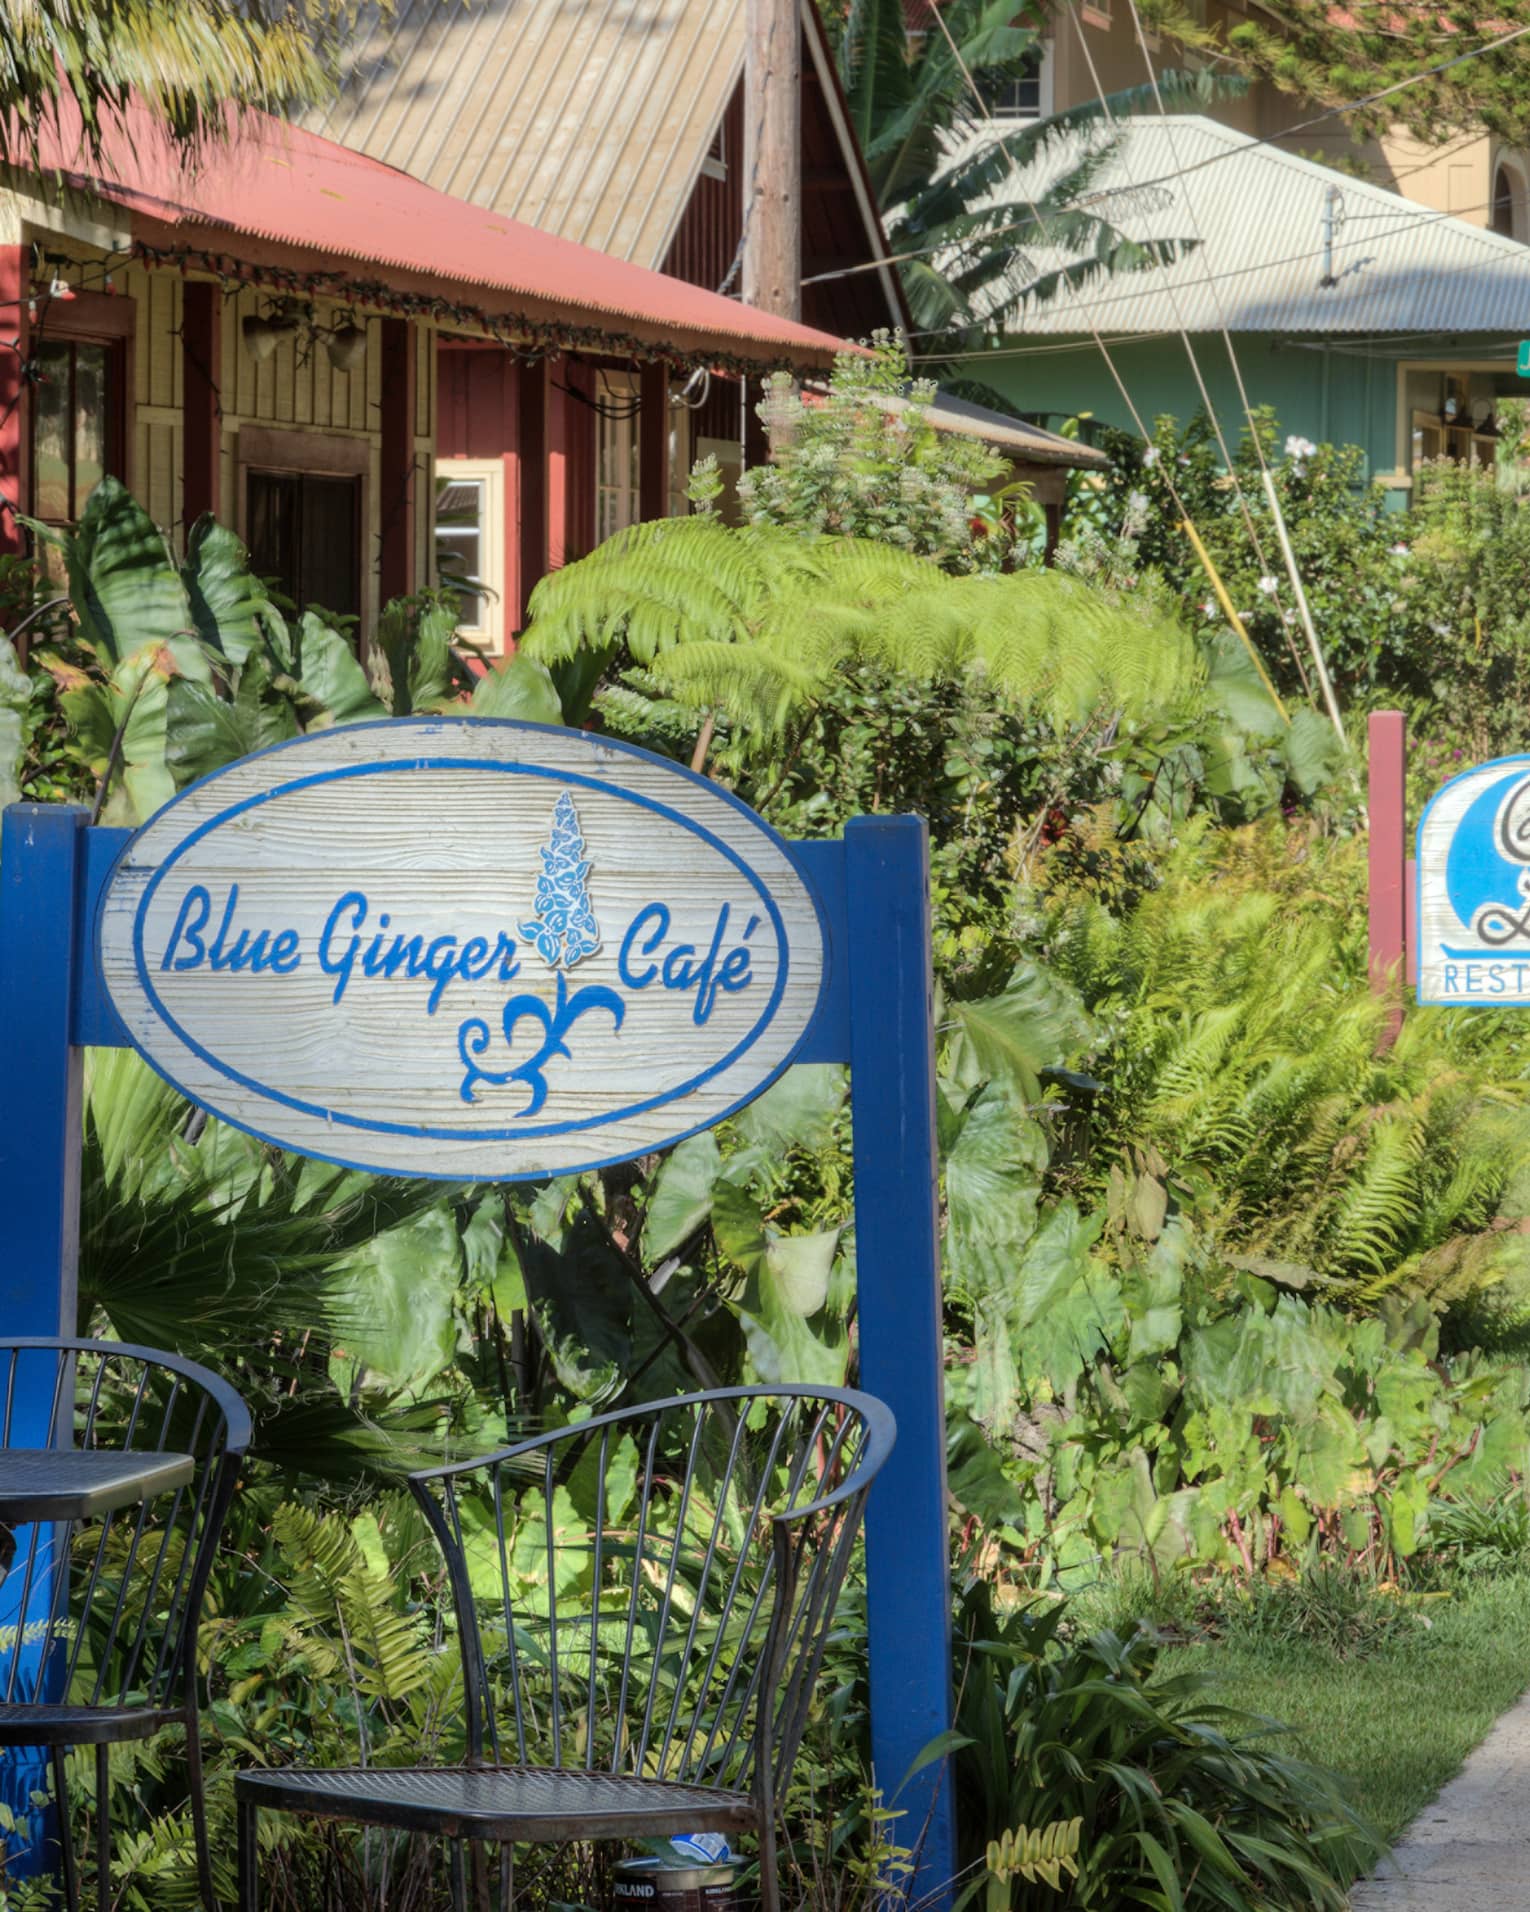 Garden patio table under Blue Ginger Cafe sign, path leading to more cafes and shops